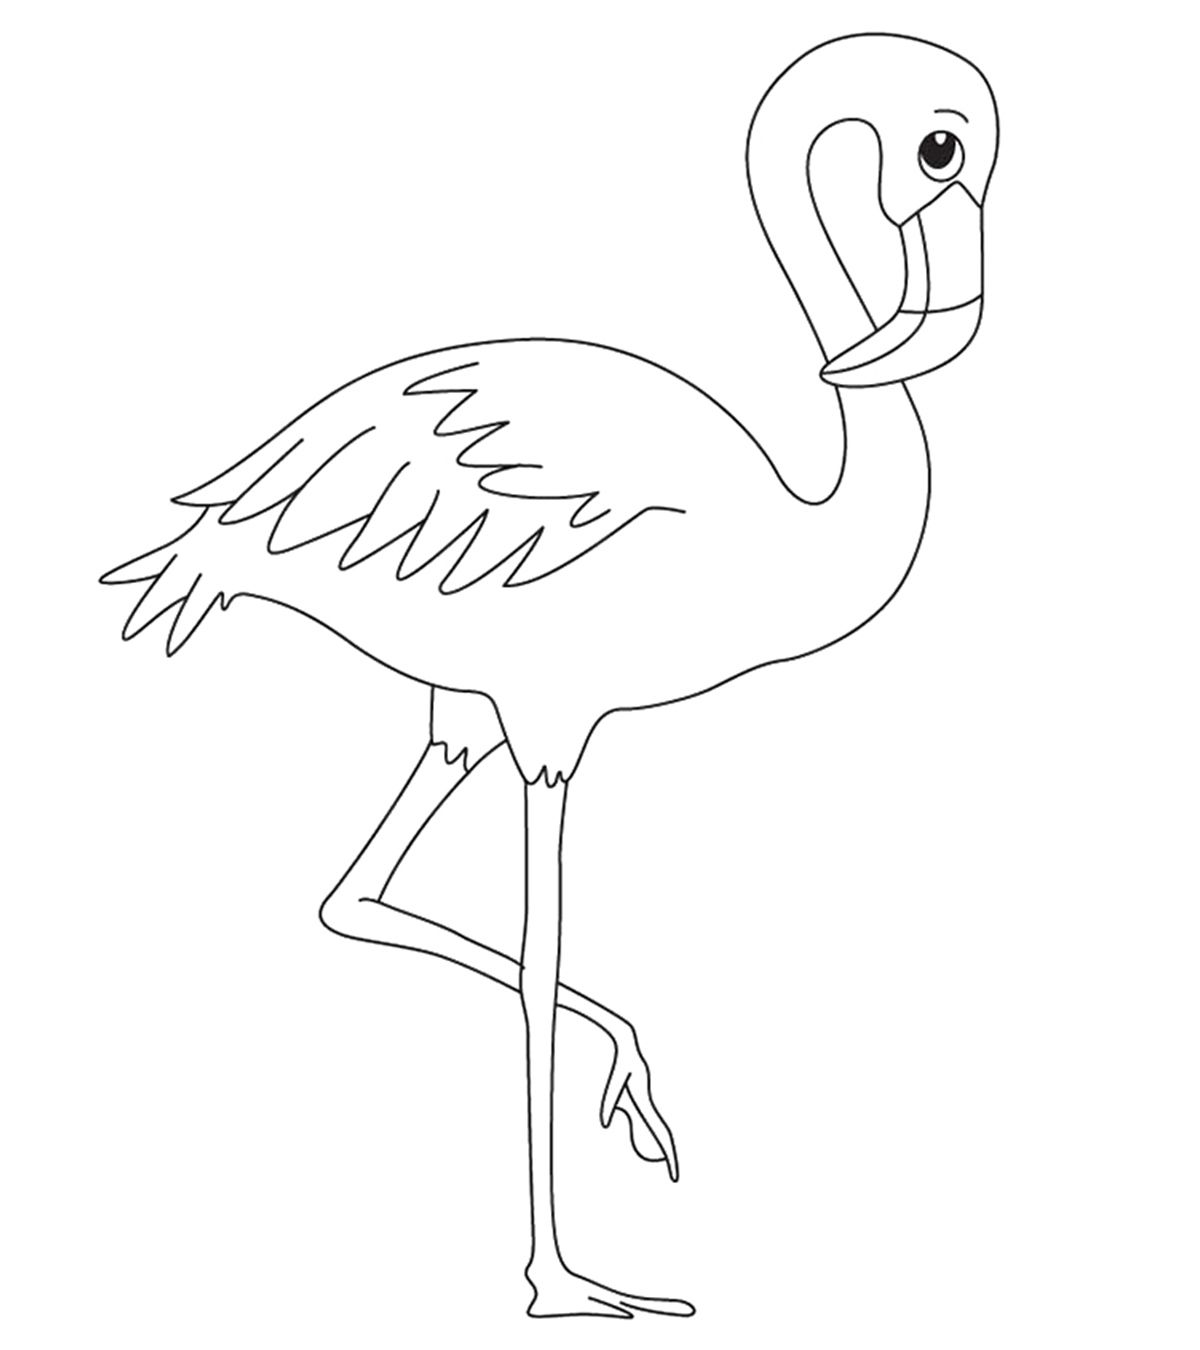 Top flamingo coloring pages for toddlers flamingo coloring page coloring pages animal coloring pages